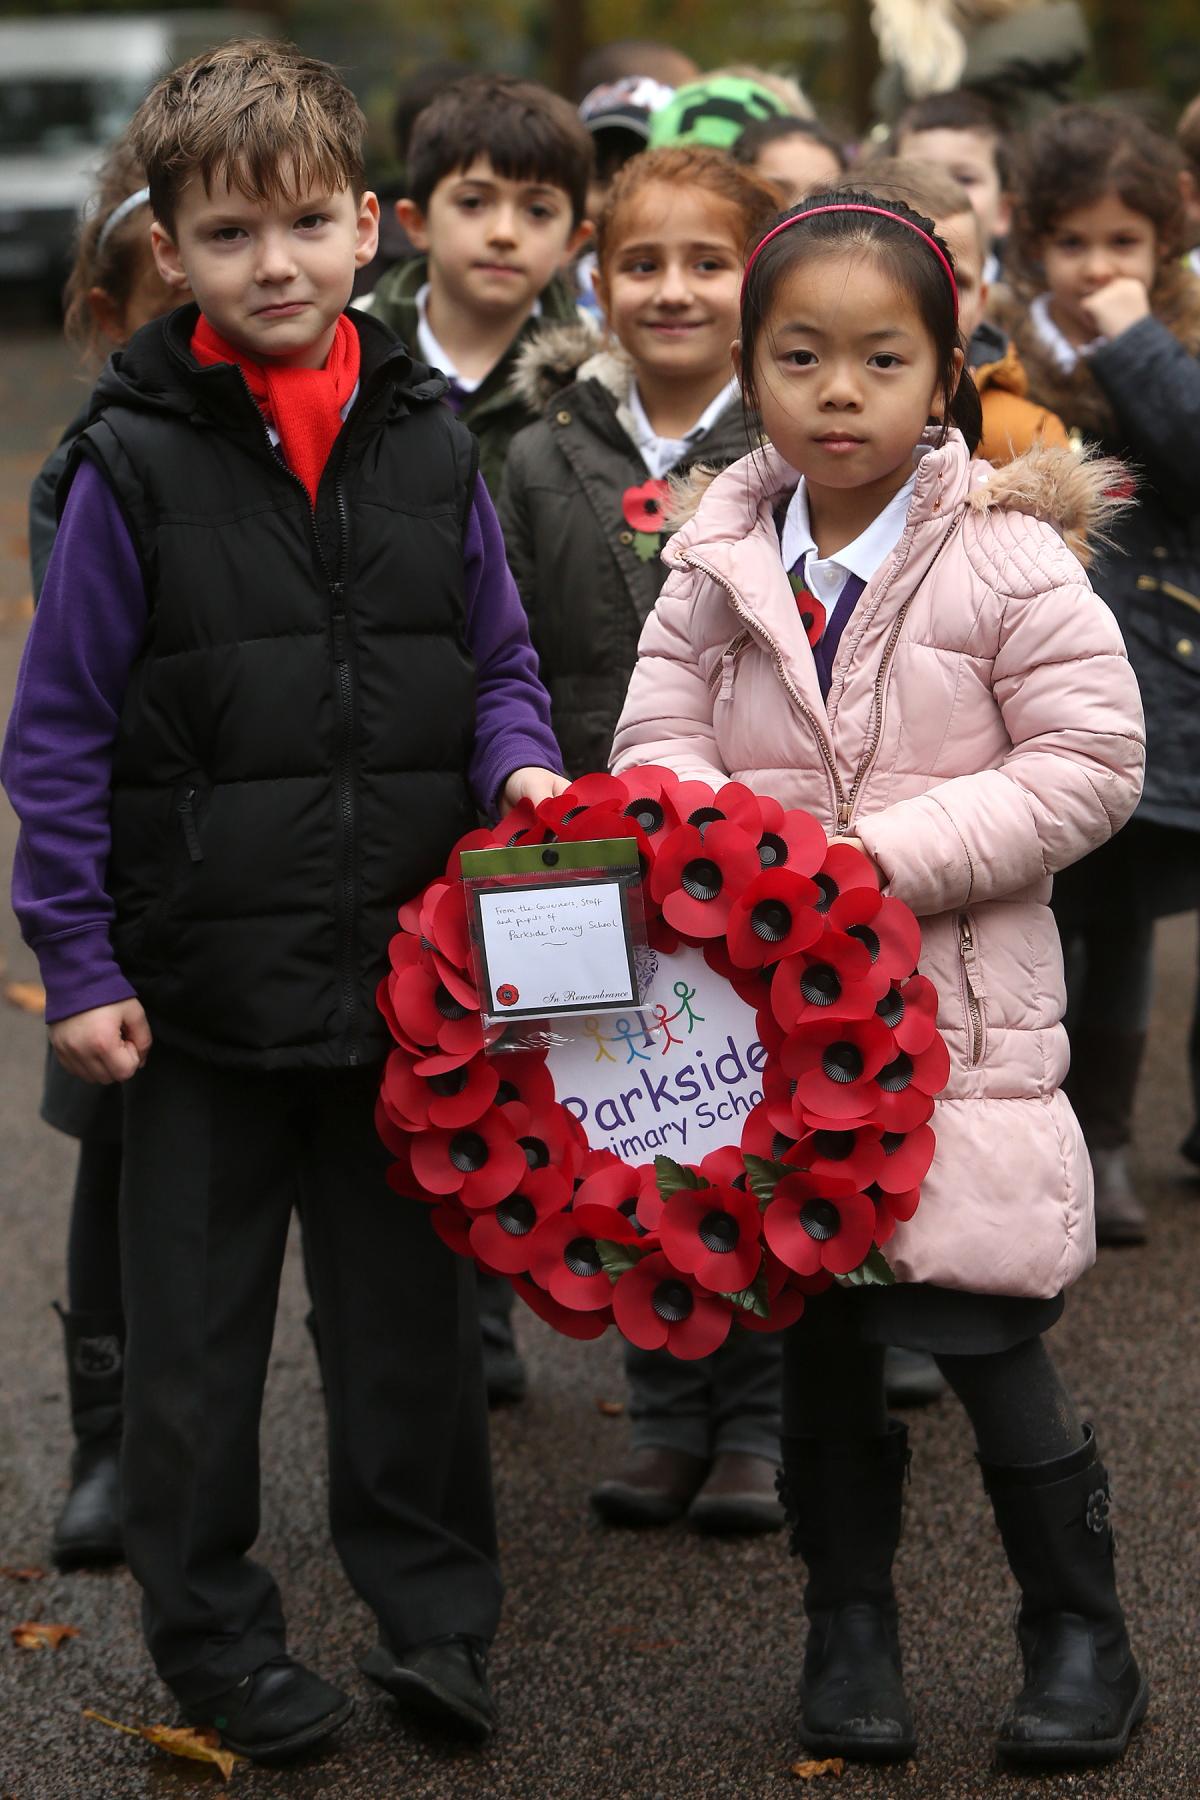 British Legion Remembrance Service at Chingford Mount Cemetery, children from Chingford Foundation, Parkside, Rushcroft and Chace Community from Enfield placed flowers over 200 graves. (6/11/2015) EL86105_6